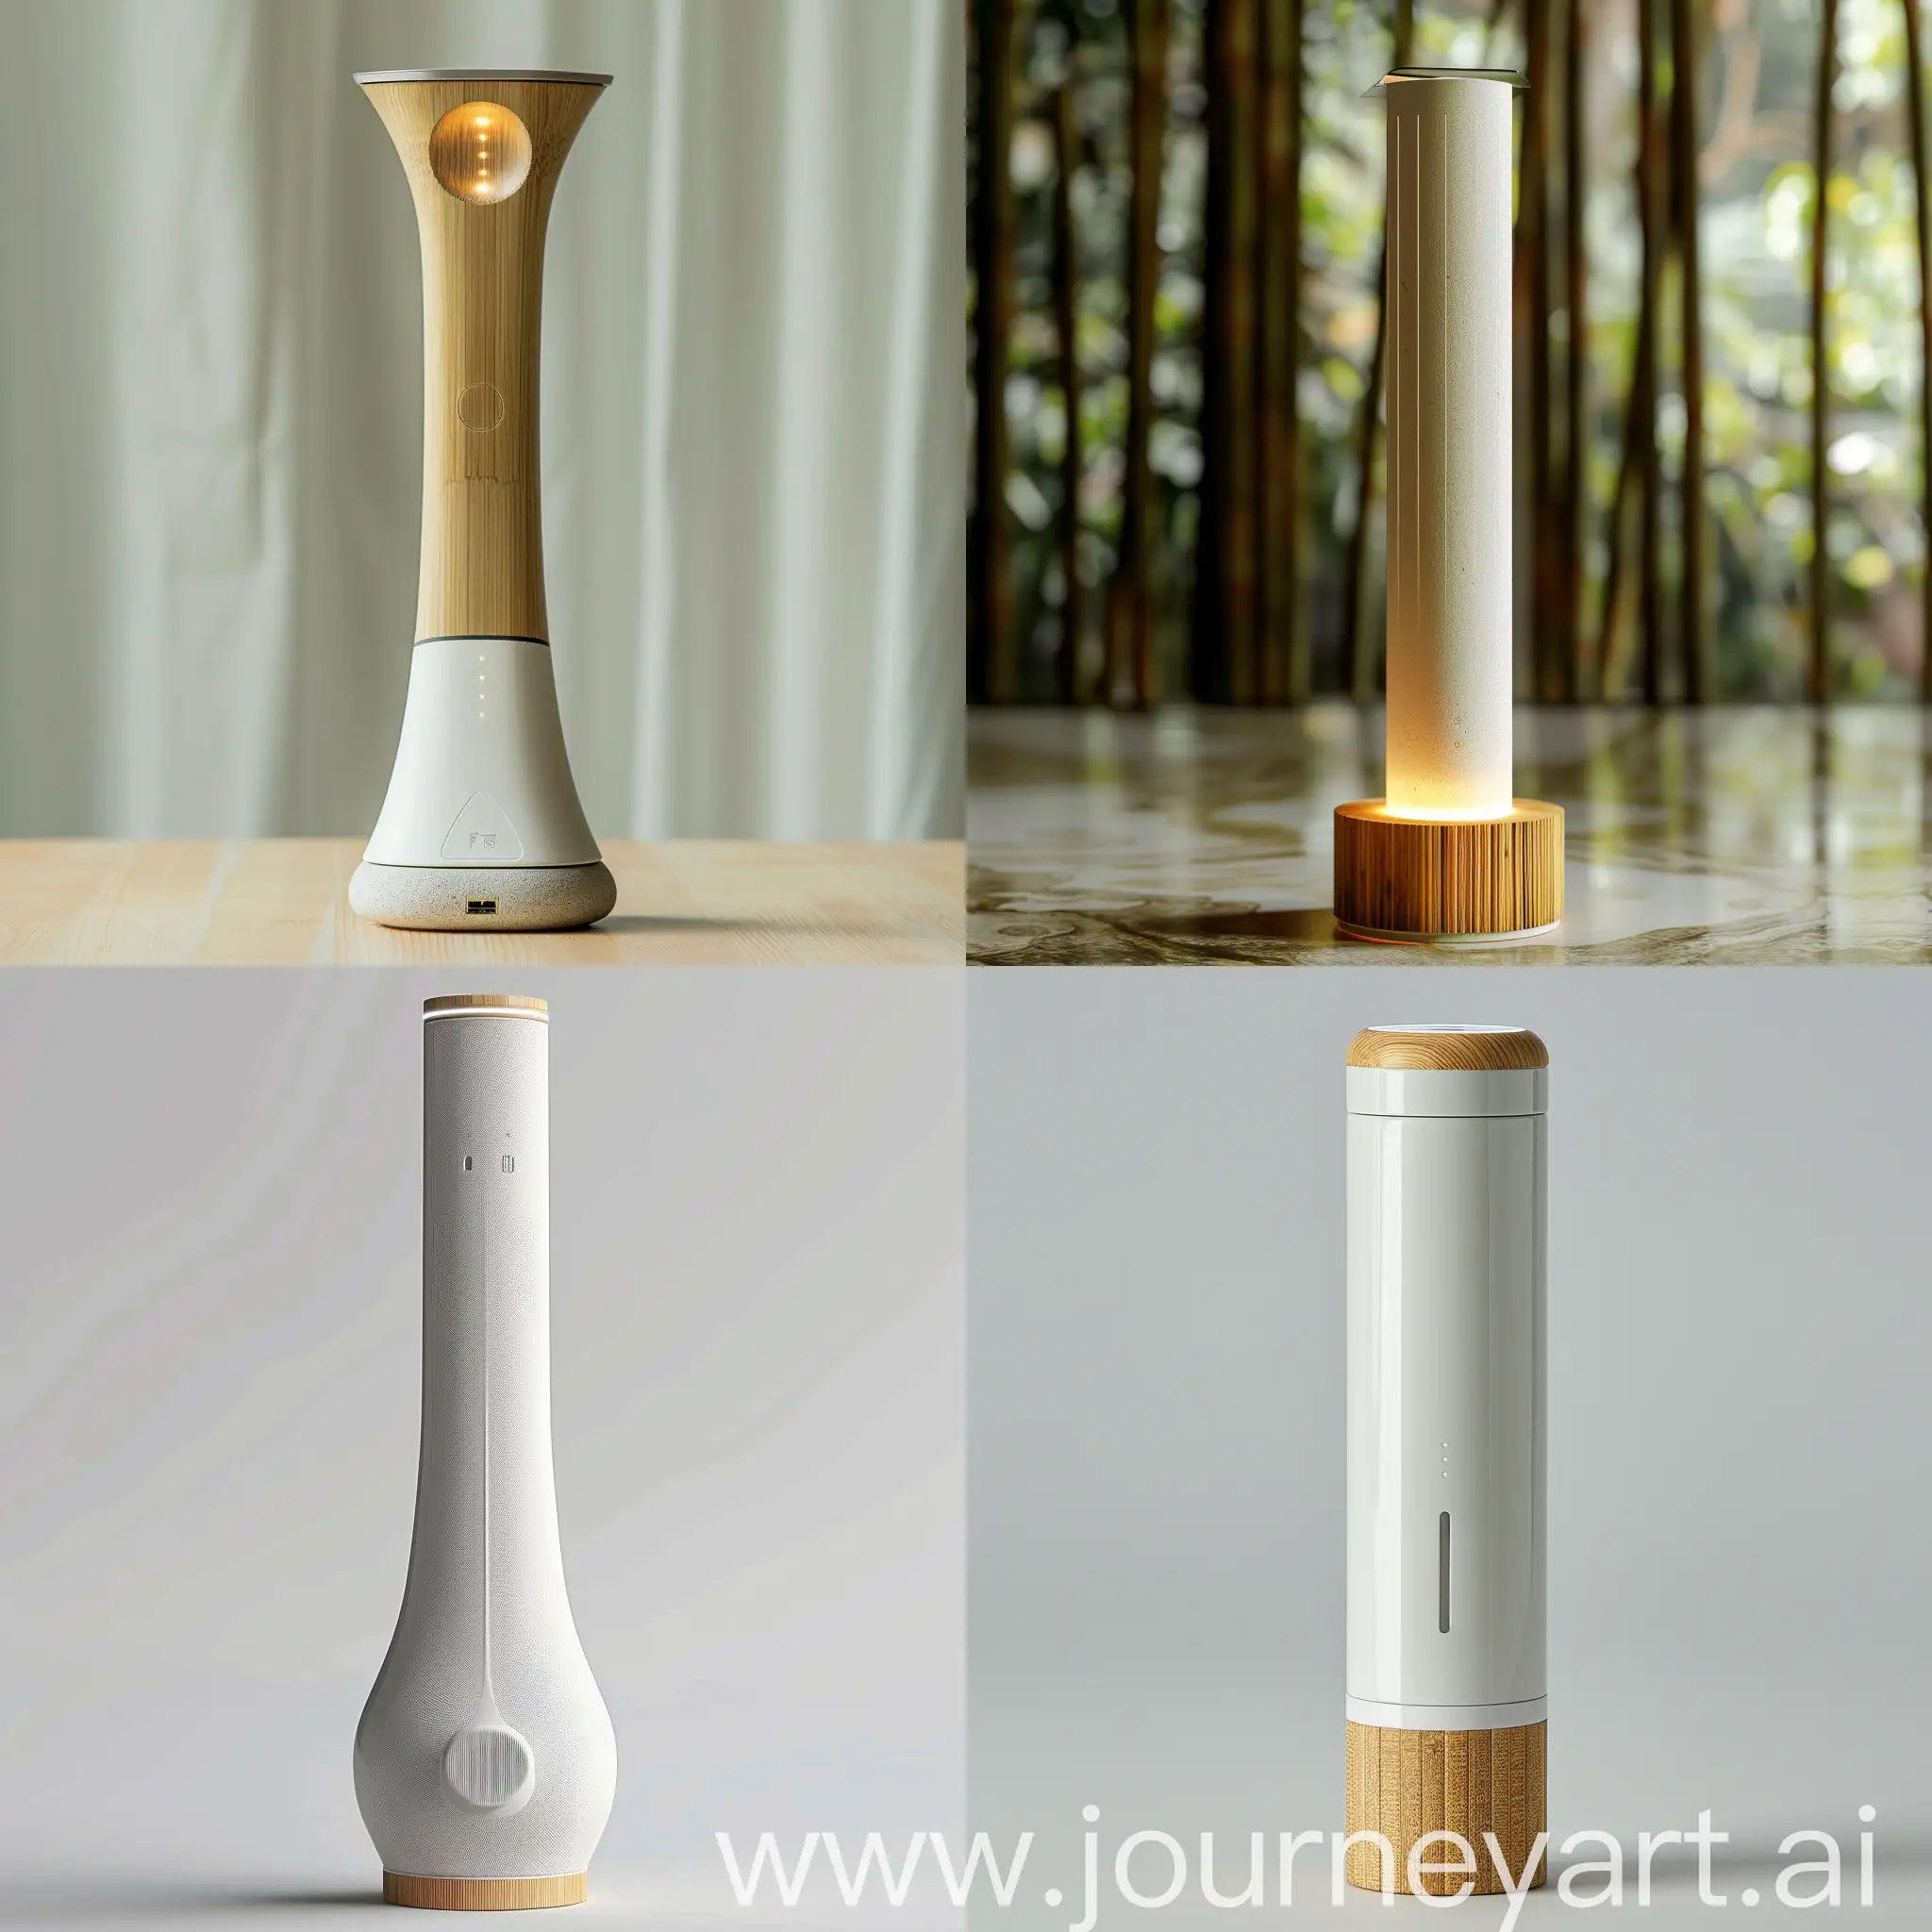 "Visualize a smart energy management device inspired by the serene beauty of Zen gardens and the natural elegance of bamboo. The device stands 25 cm tall, tapering from an 8 cm sustainable bamboo base to a 5 cm top, embodying the strength and flexibility of bamboo. Its body, made from high-quality recycled plastics, adopts neutral tones of white or light gray, with a textured surface mimicking bamboo's natural feel. Atop, an innovative LED light tag simulates the dappled sunlight through bamboo leaves, serving both as an ambient light source and notification indicator. A discreet touch-sensitive strip allows for intuitive user interaction, blending seamlessly into the device's form. The base hides a USB-C charging port, maintaining the sleek, cord-free aesthetic. This concept merges technology with traditional Zen aesthetics, creating a piece that not only enhances smart home functionality but also promotes sustainability and mindfulness."realistic style